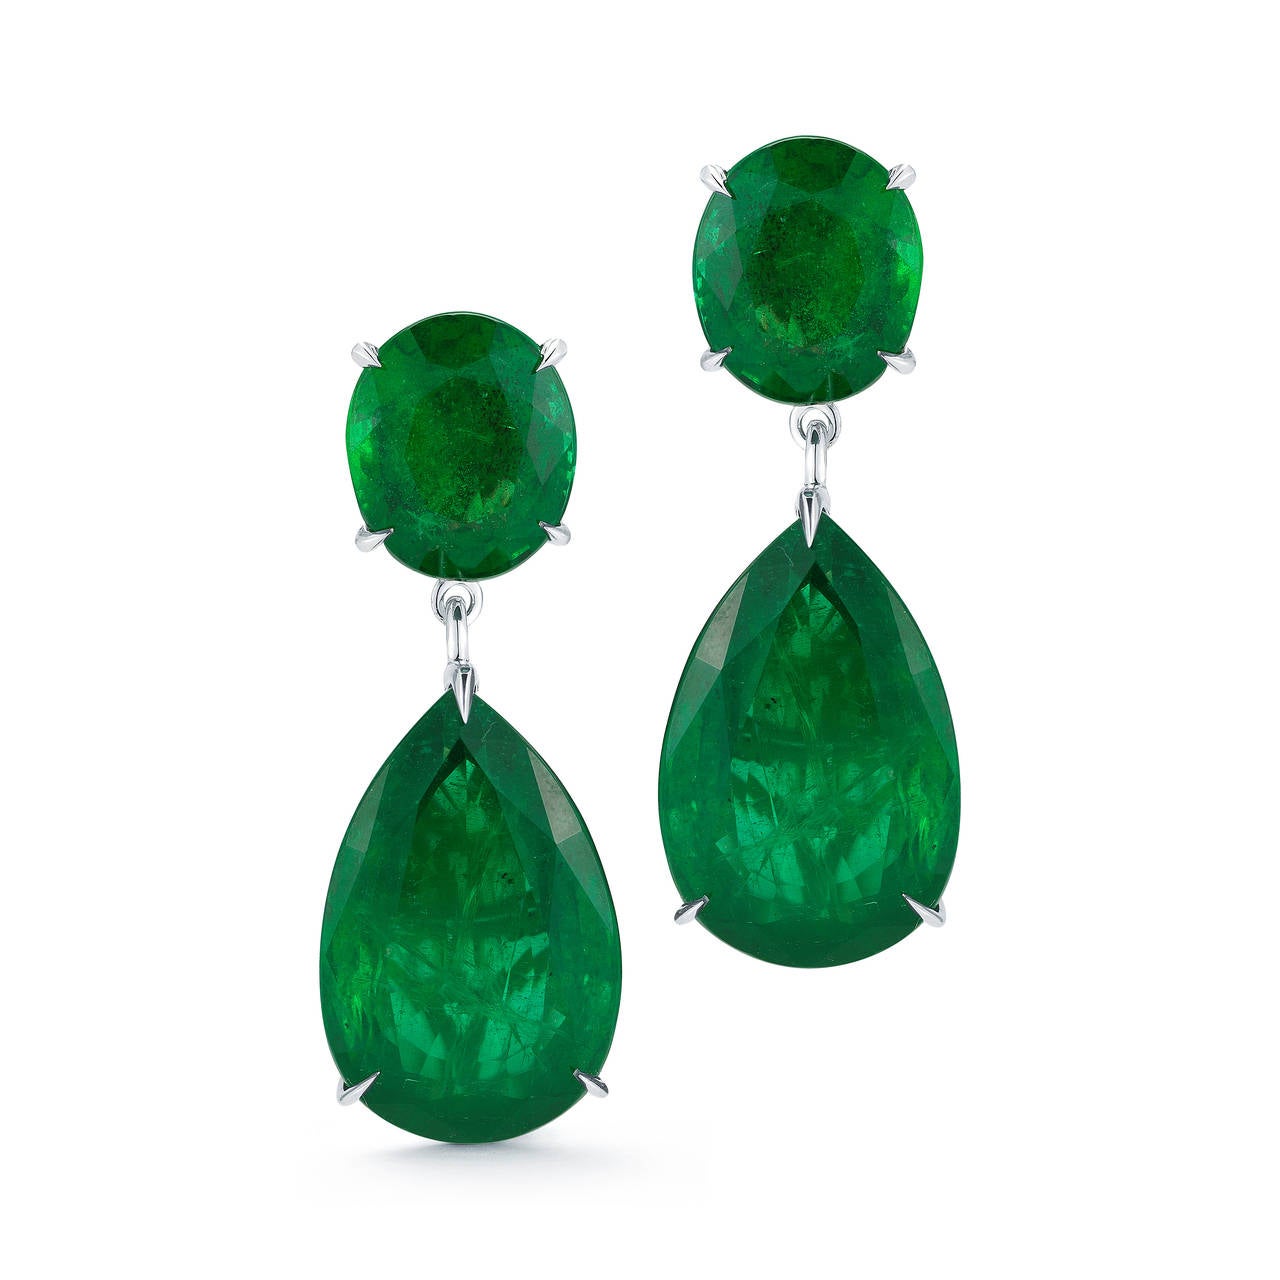 Stunning Emerald Earring By TAKAT... Similar look of Angelina Jolie emerald earring.. This earring you can wear 3 different ways. for example look at the picture. all 4 stones are GIA certified.
Product ID:02108
Model:TK MB 474
Metal:18K W
Gram